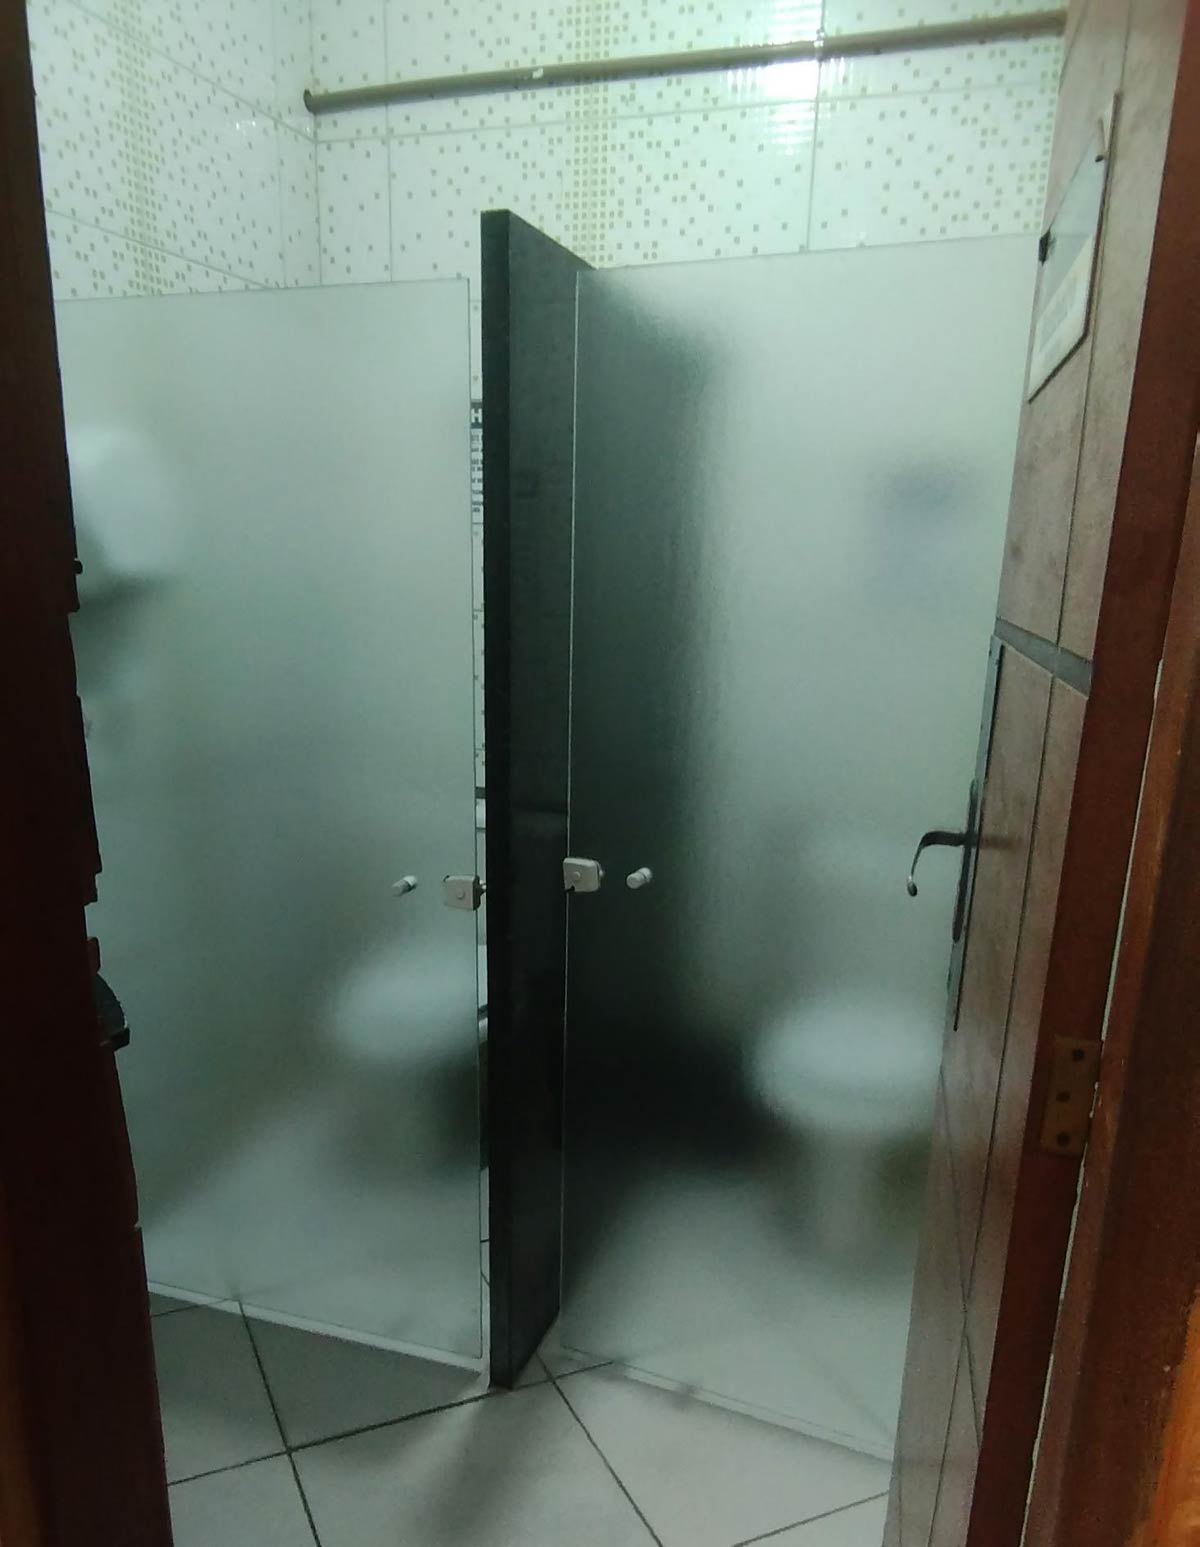 The students at my course complained about not having enough privacy and they decided to install glass doors to solve the issue